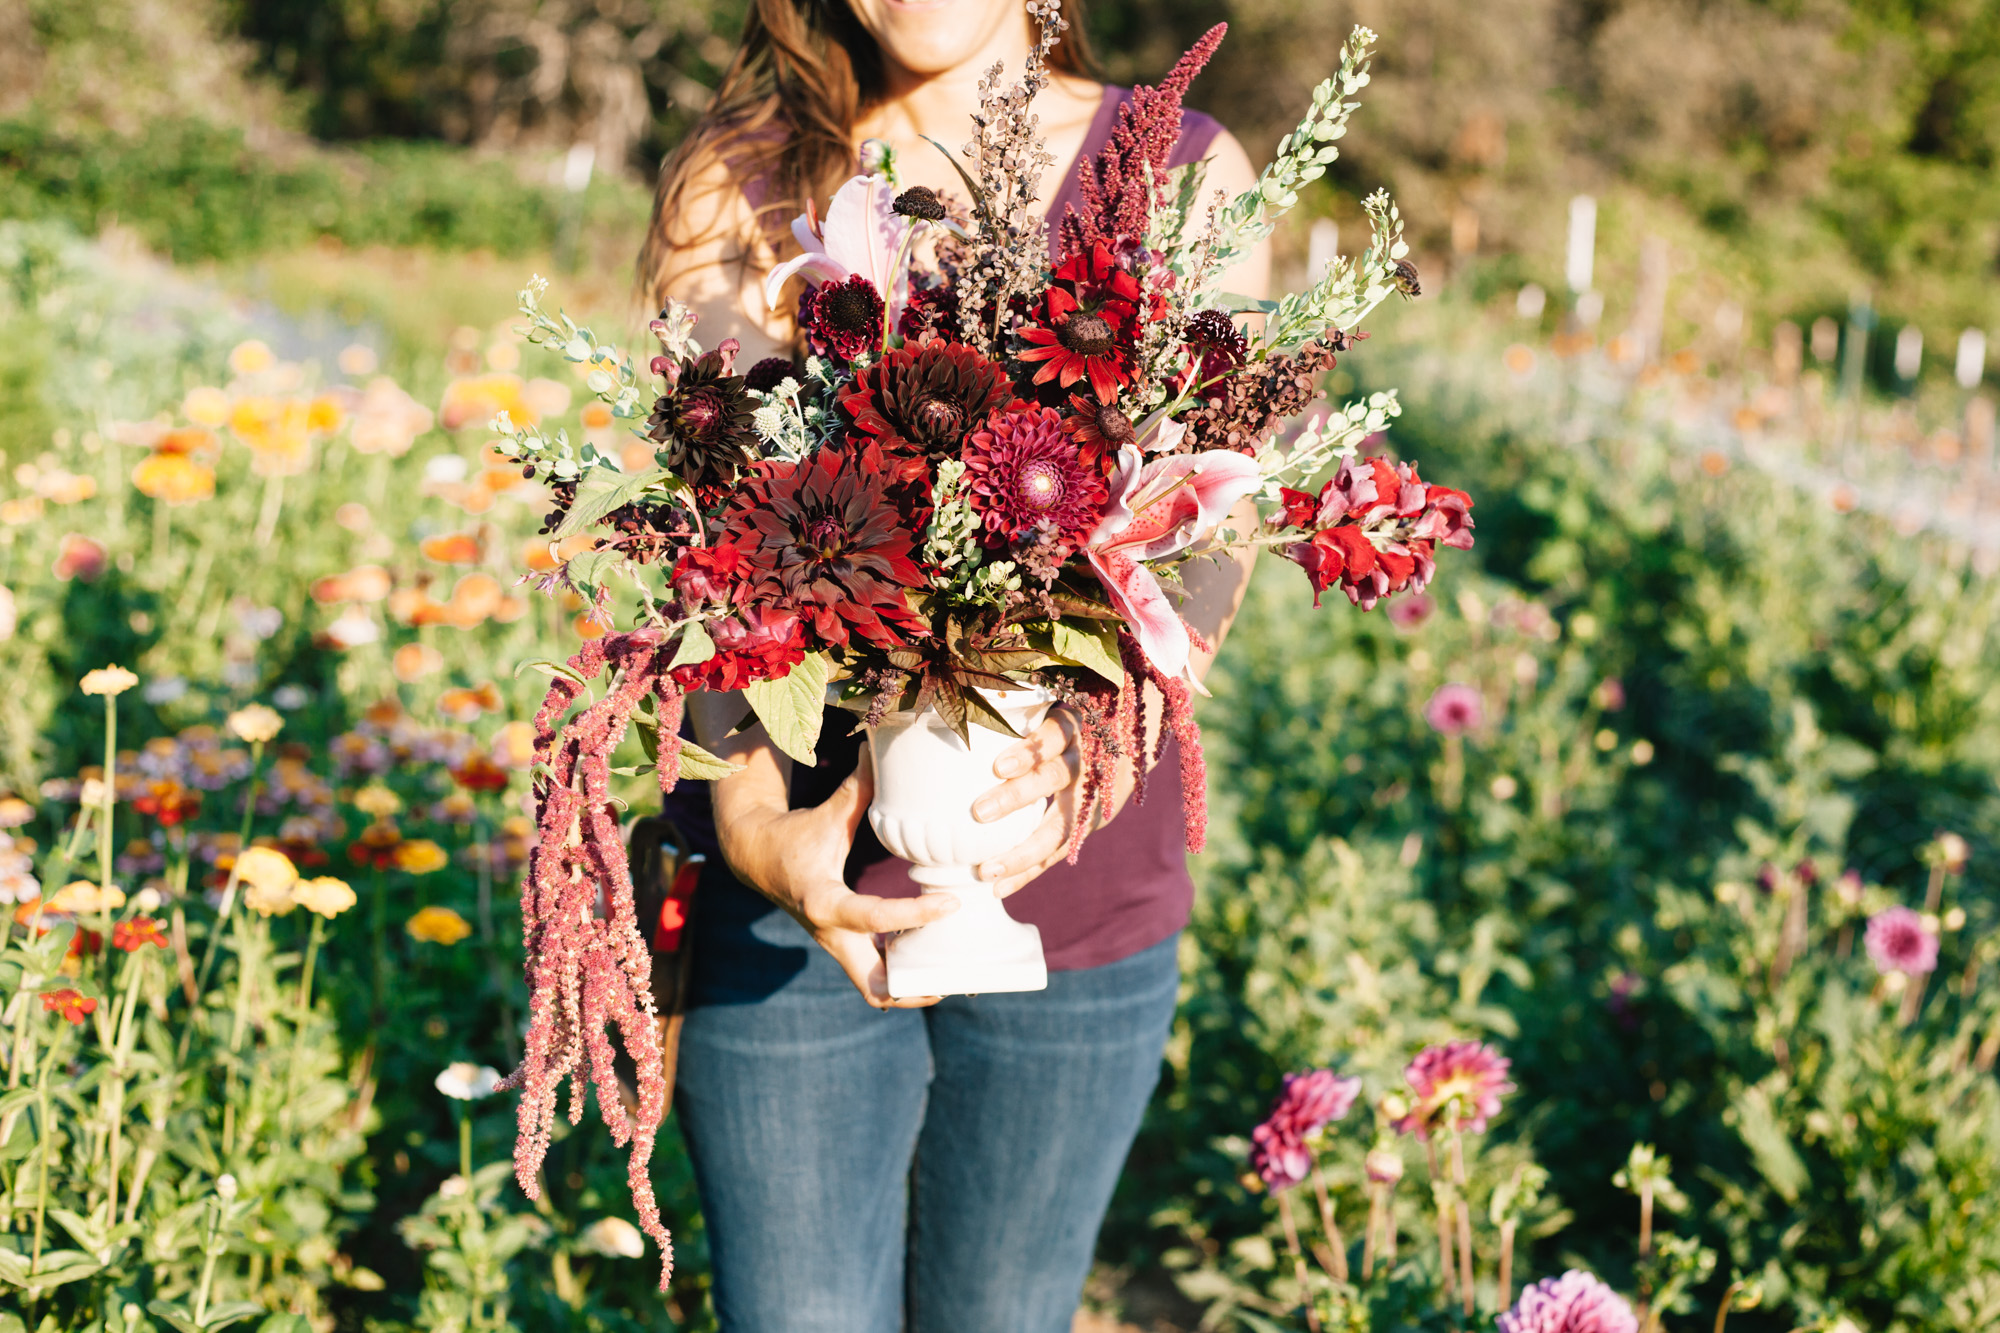  And here I am with a centerpiece arrangement in the field near where these flowers were harvested. 